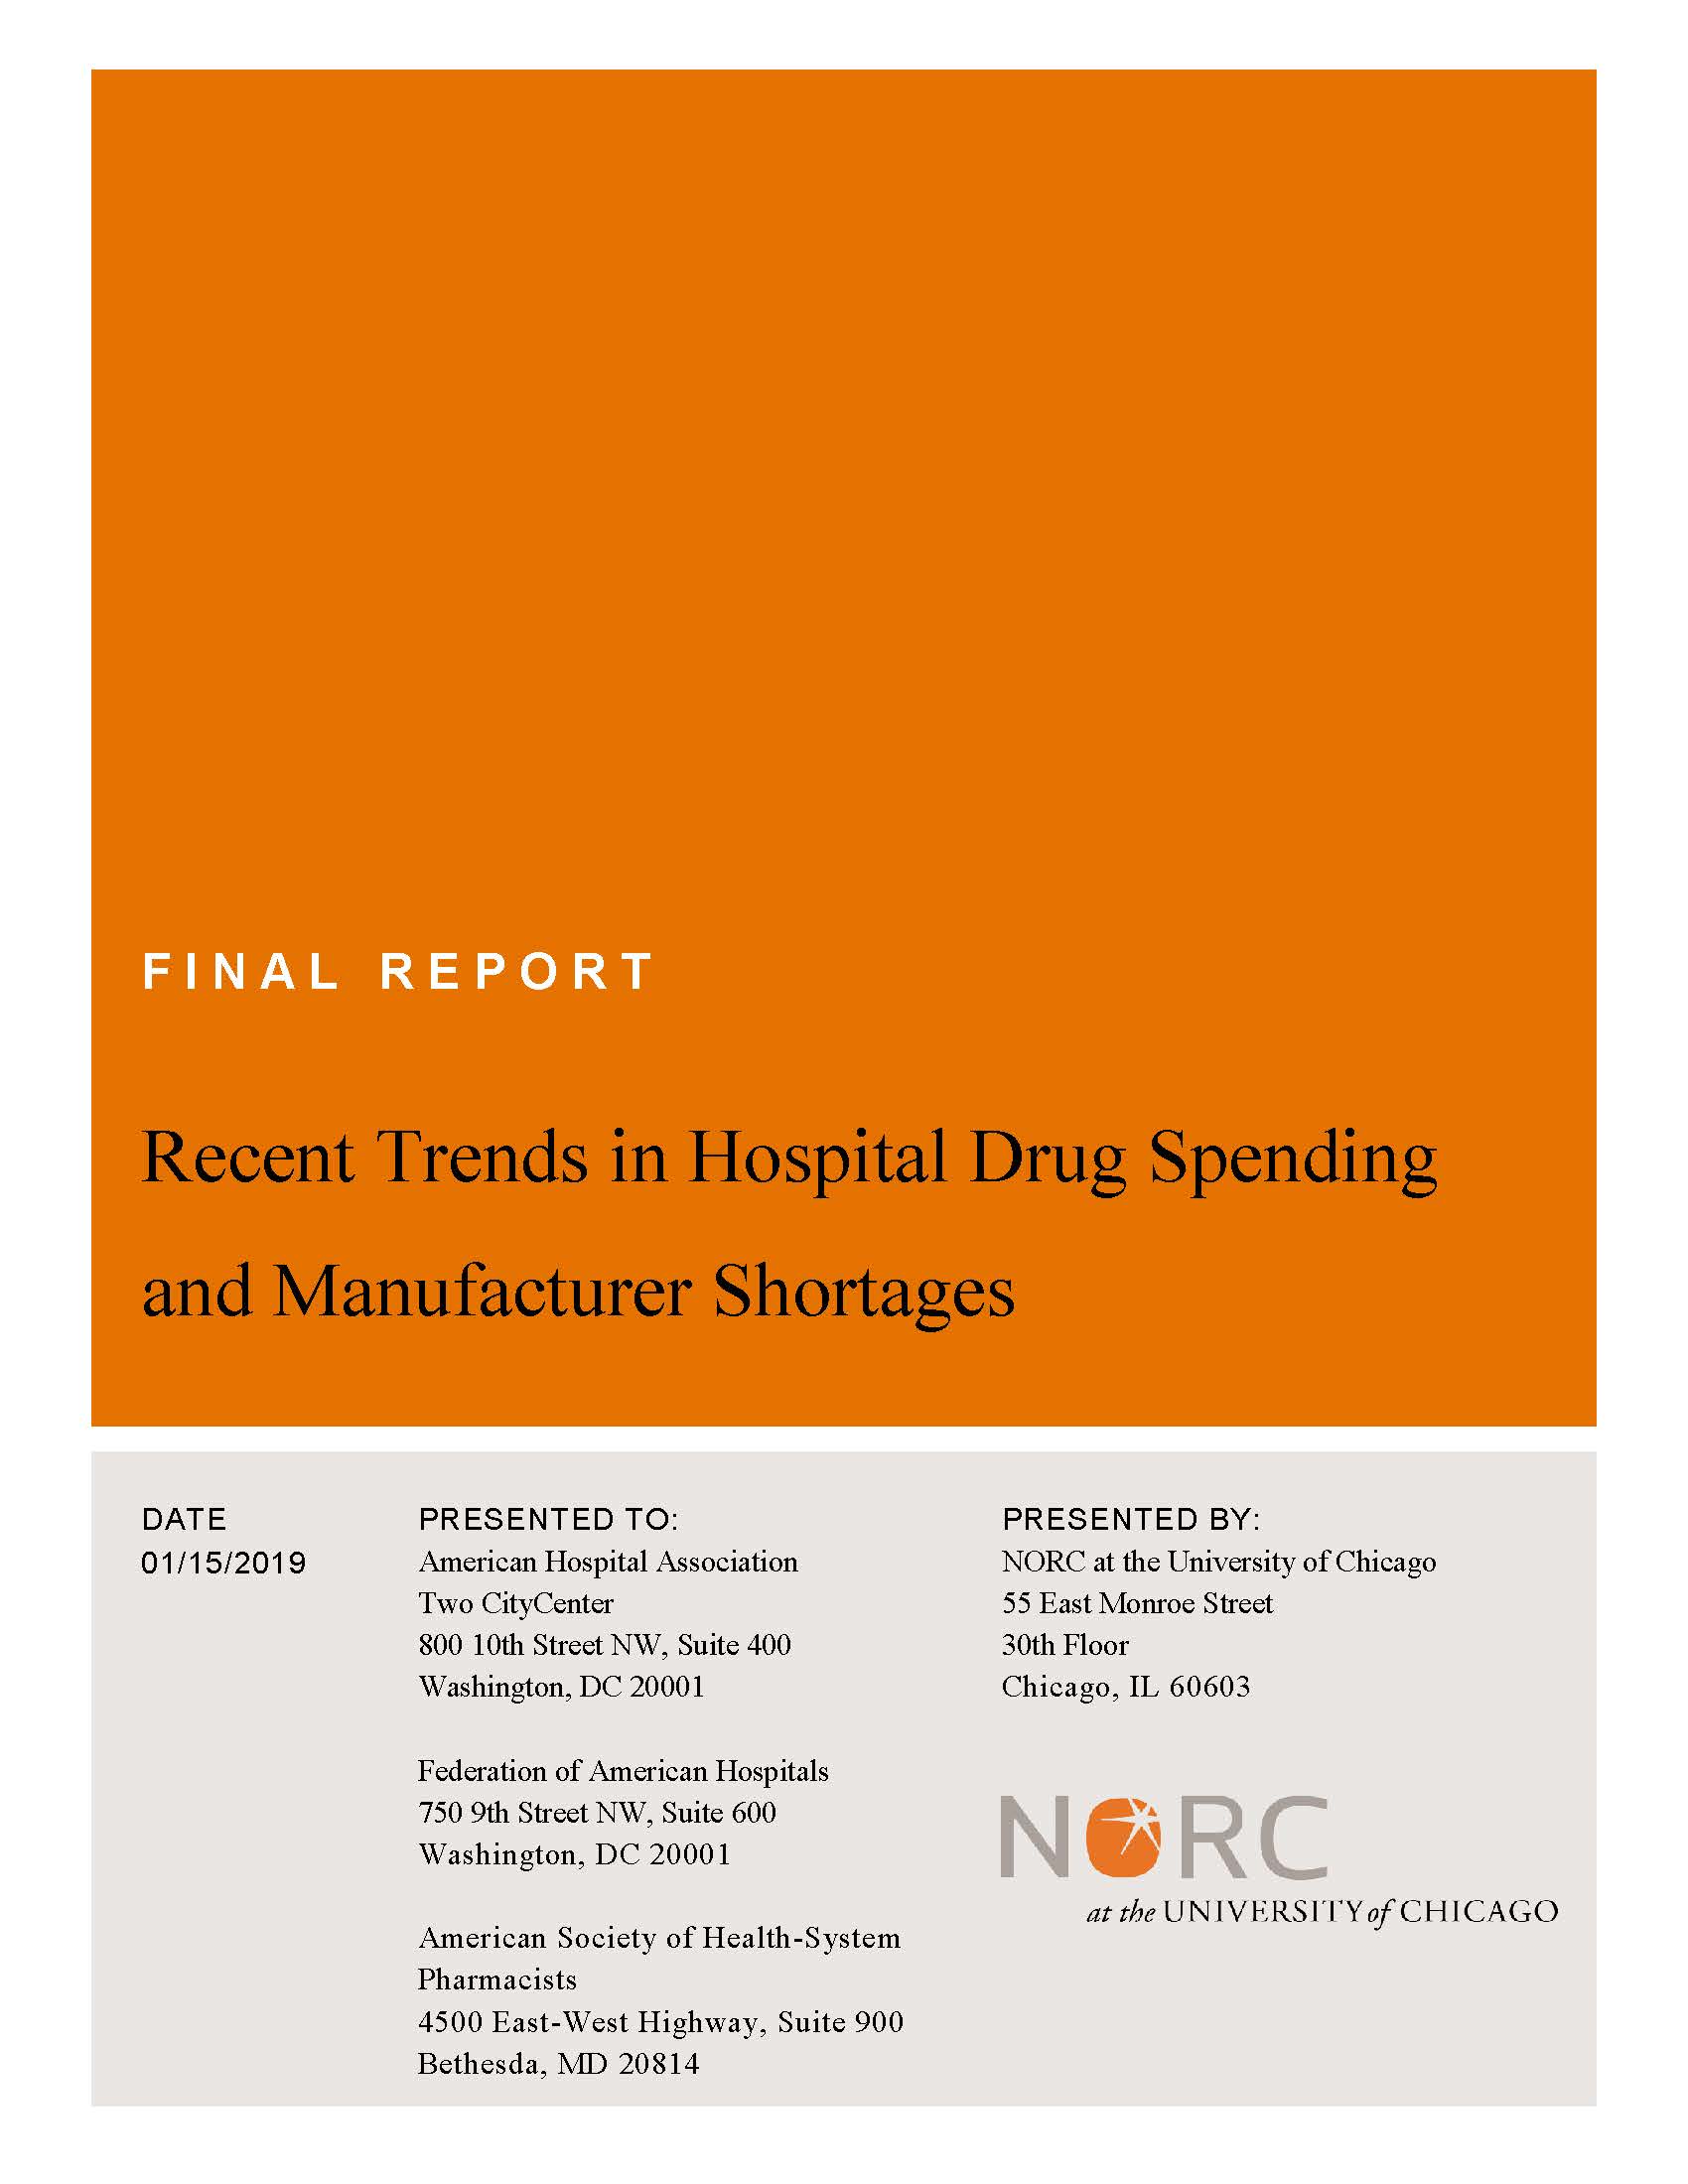 Recent Trends in Hospital Drug Spending and Manufacturing Shortages PDF page 1